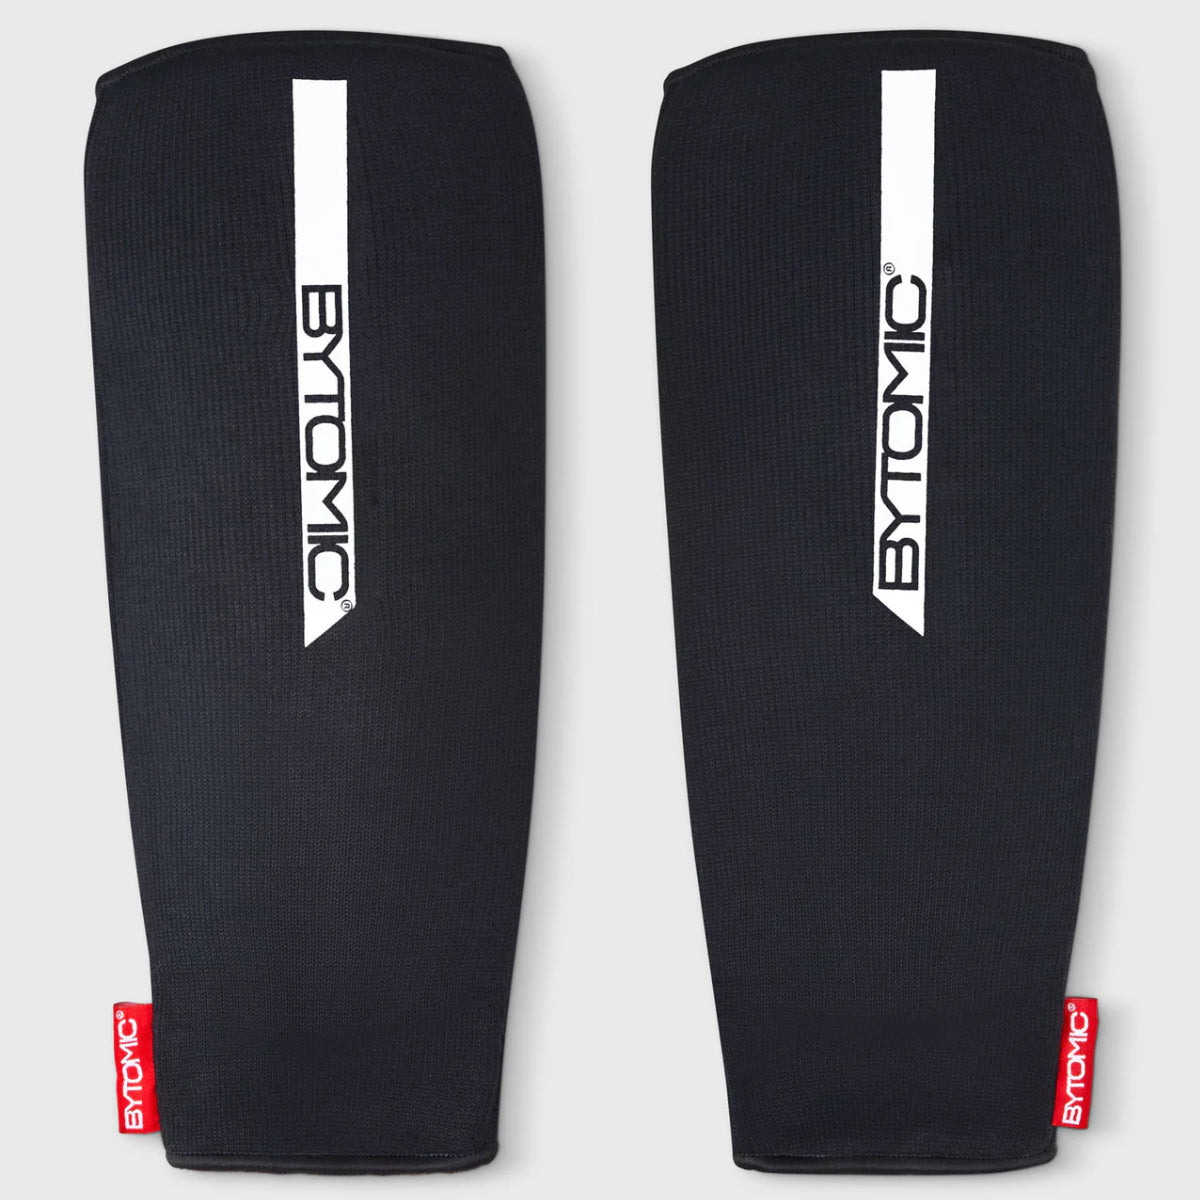 Black/White Bytomic Red Label Elasticated Shin Guards from Made4Fighters